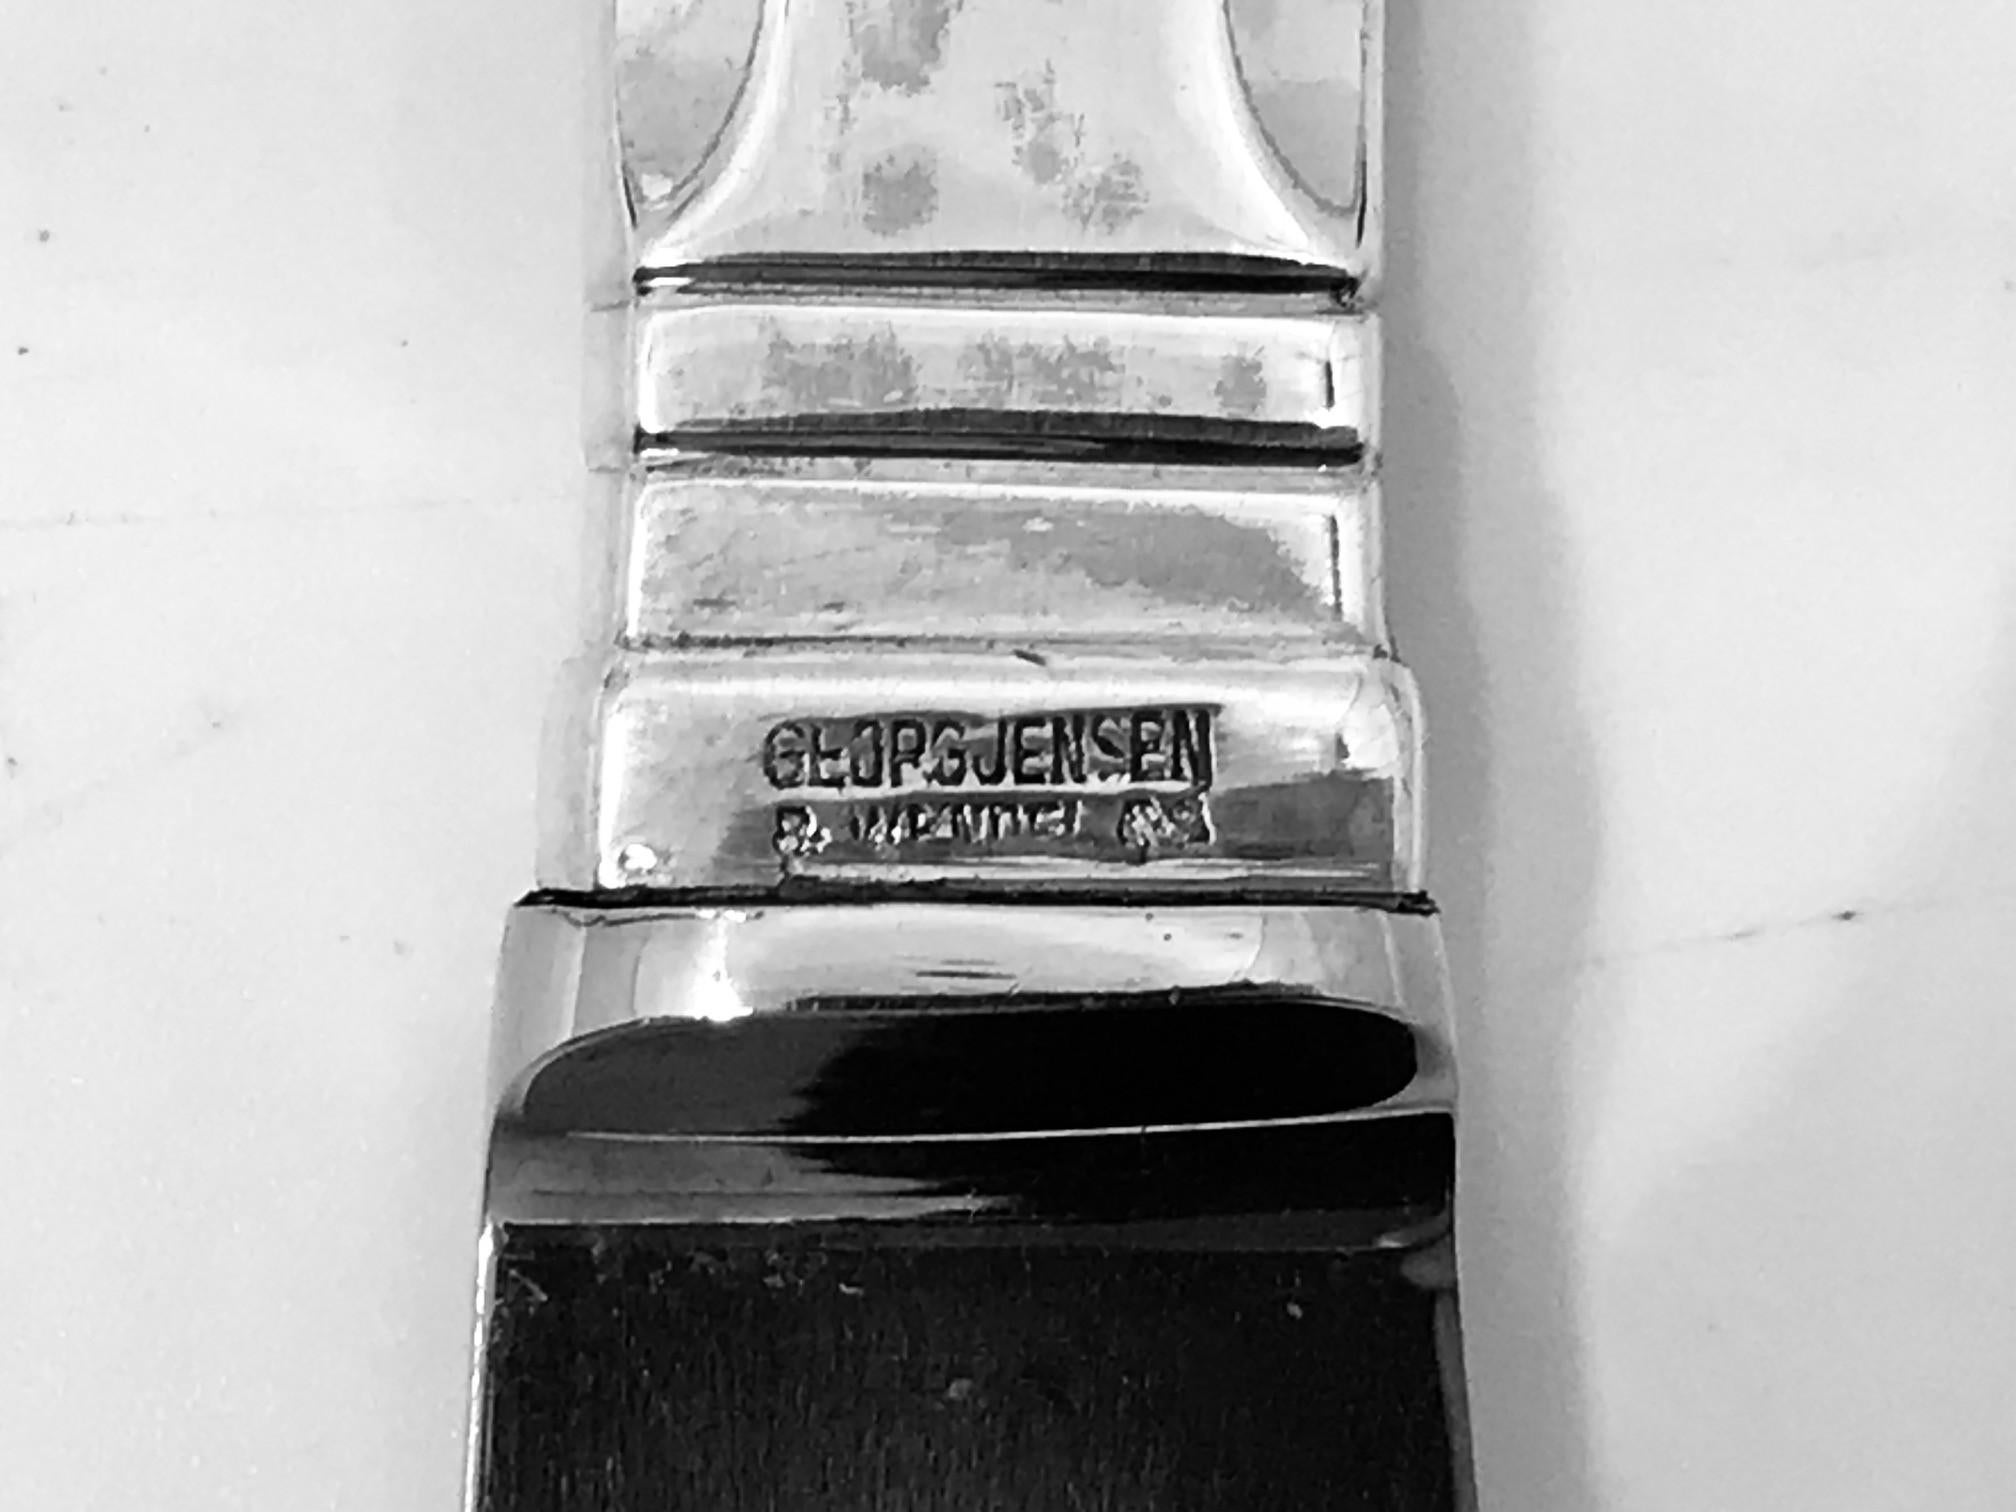 A Georg Jensen dinner knife with silver handle and stainless steel blade, item 013 in the Continental pattern, design #4 by Georg Jensen from 1906.

Additional information:
Material: Sterling silver, stainless steel
Styles: Art Nouveau
Hallmarks: